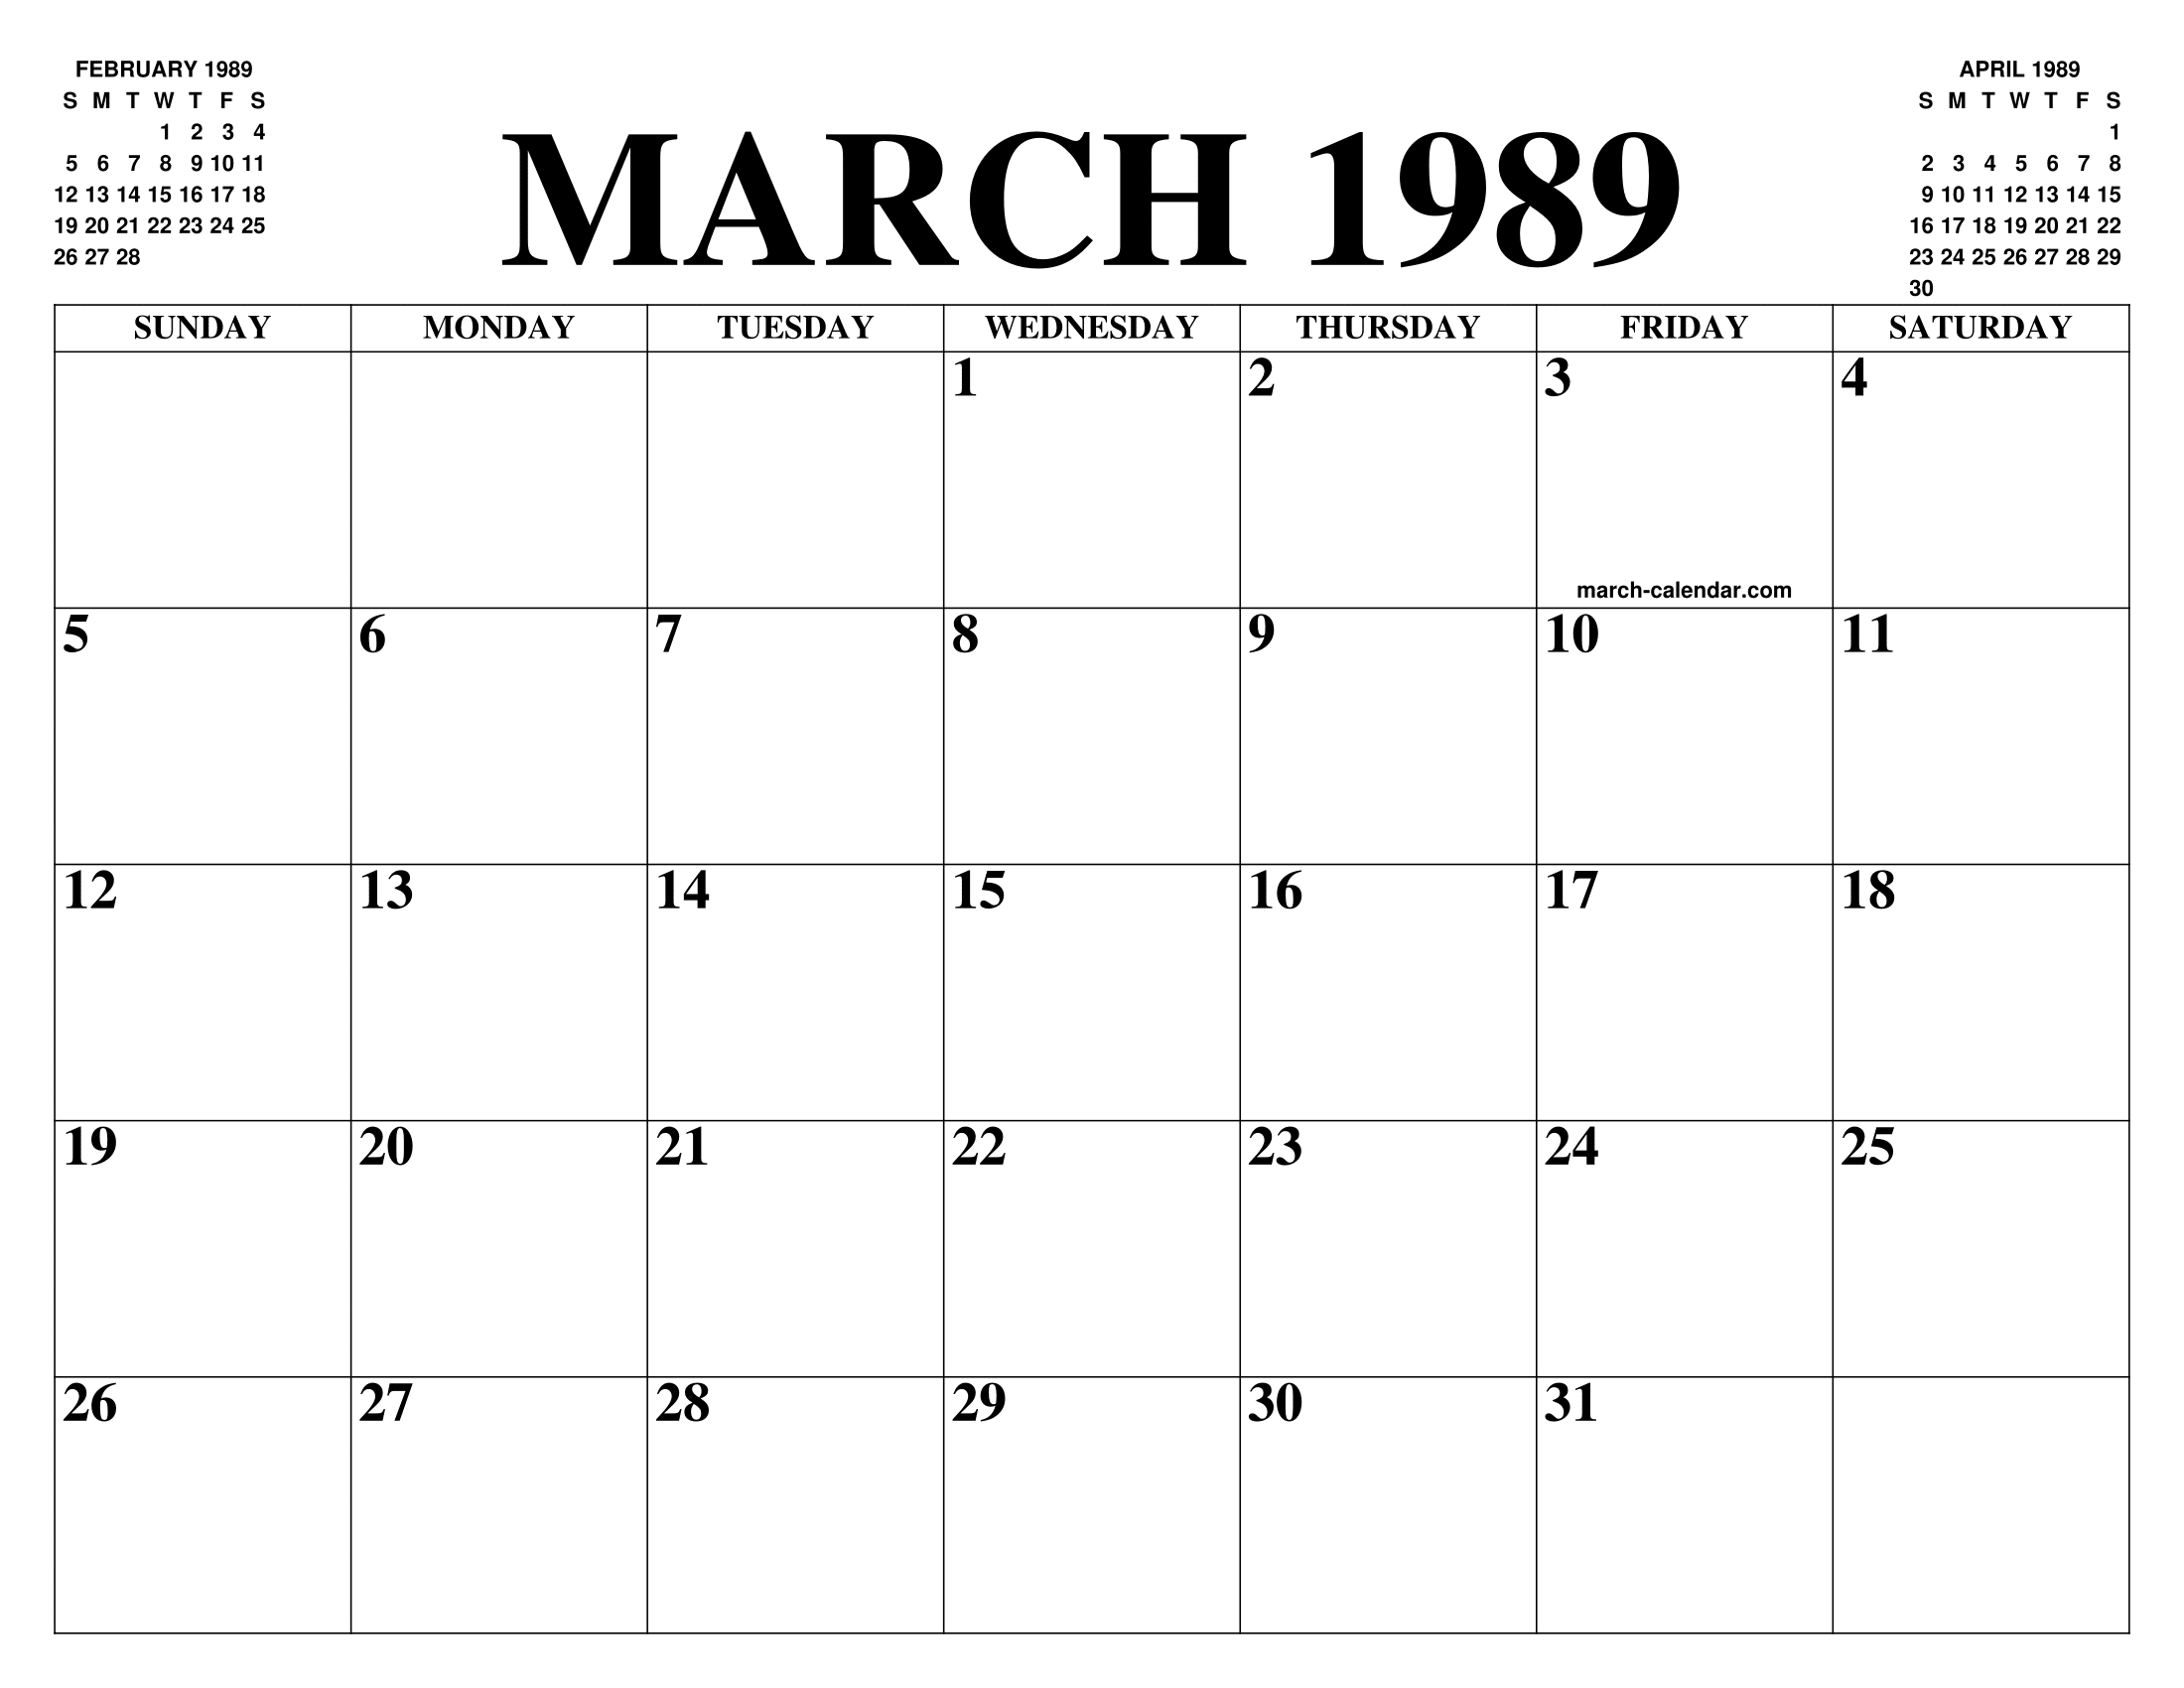 MARCH 1989 CALENDAR OF THE MONTH: FREE PRINTABLE MARCH CALENDAR OF THE